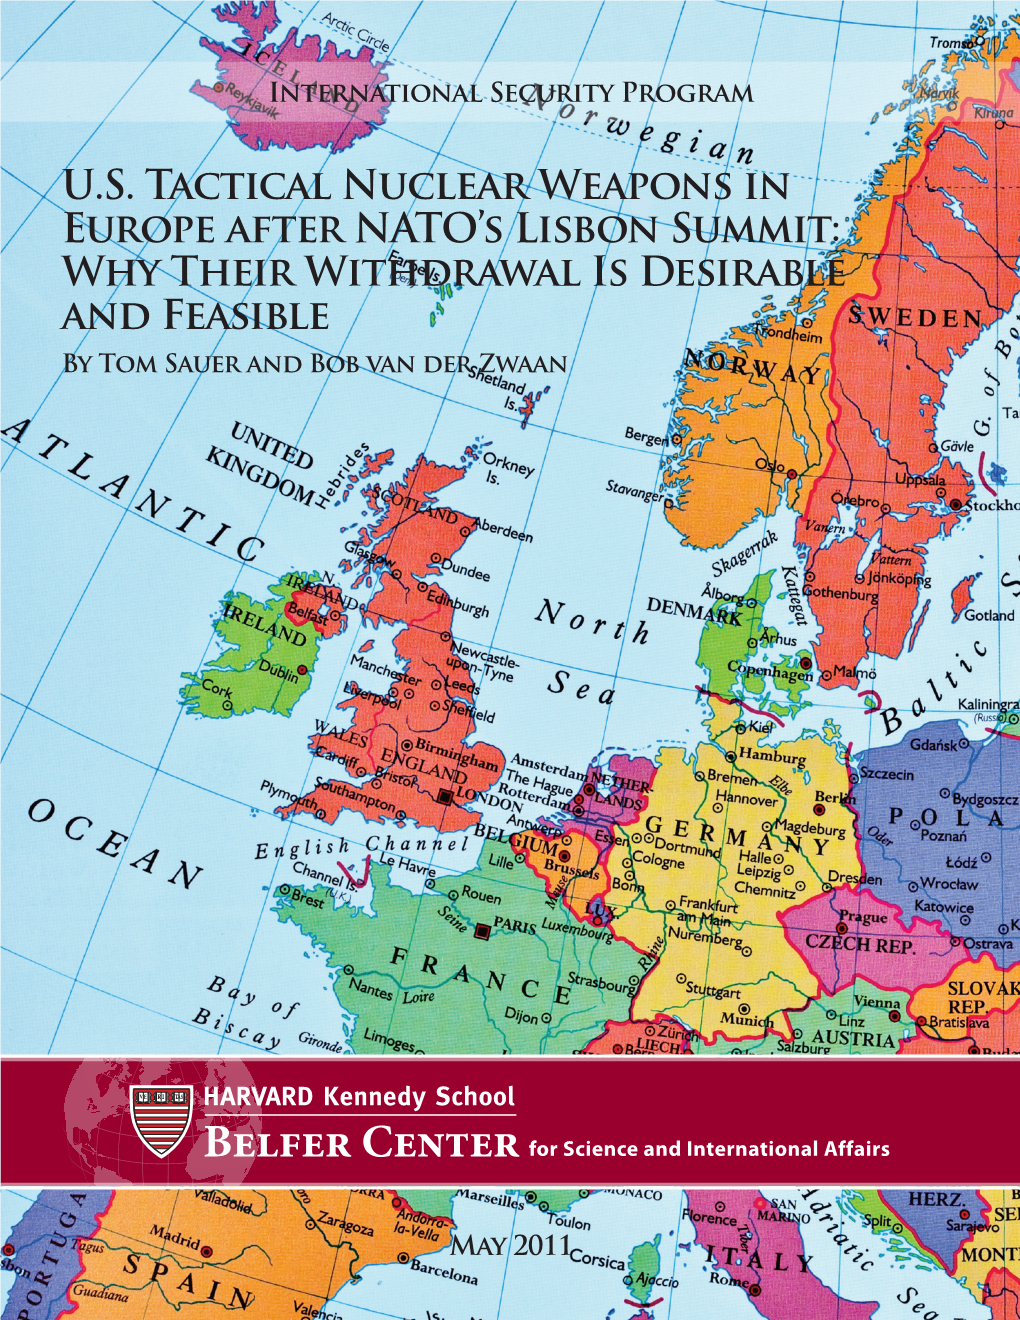 Tactical Nuclear Weapons in Europe After NATO’S Lisbon Summit: Why Their Withdrawal Is Desirable and Feasible by Tom Sauer and Bob Van Der Zwaan